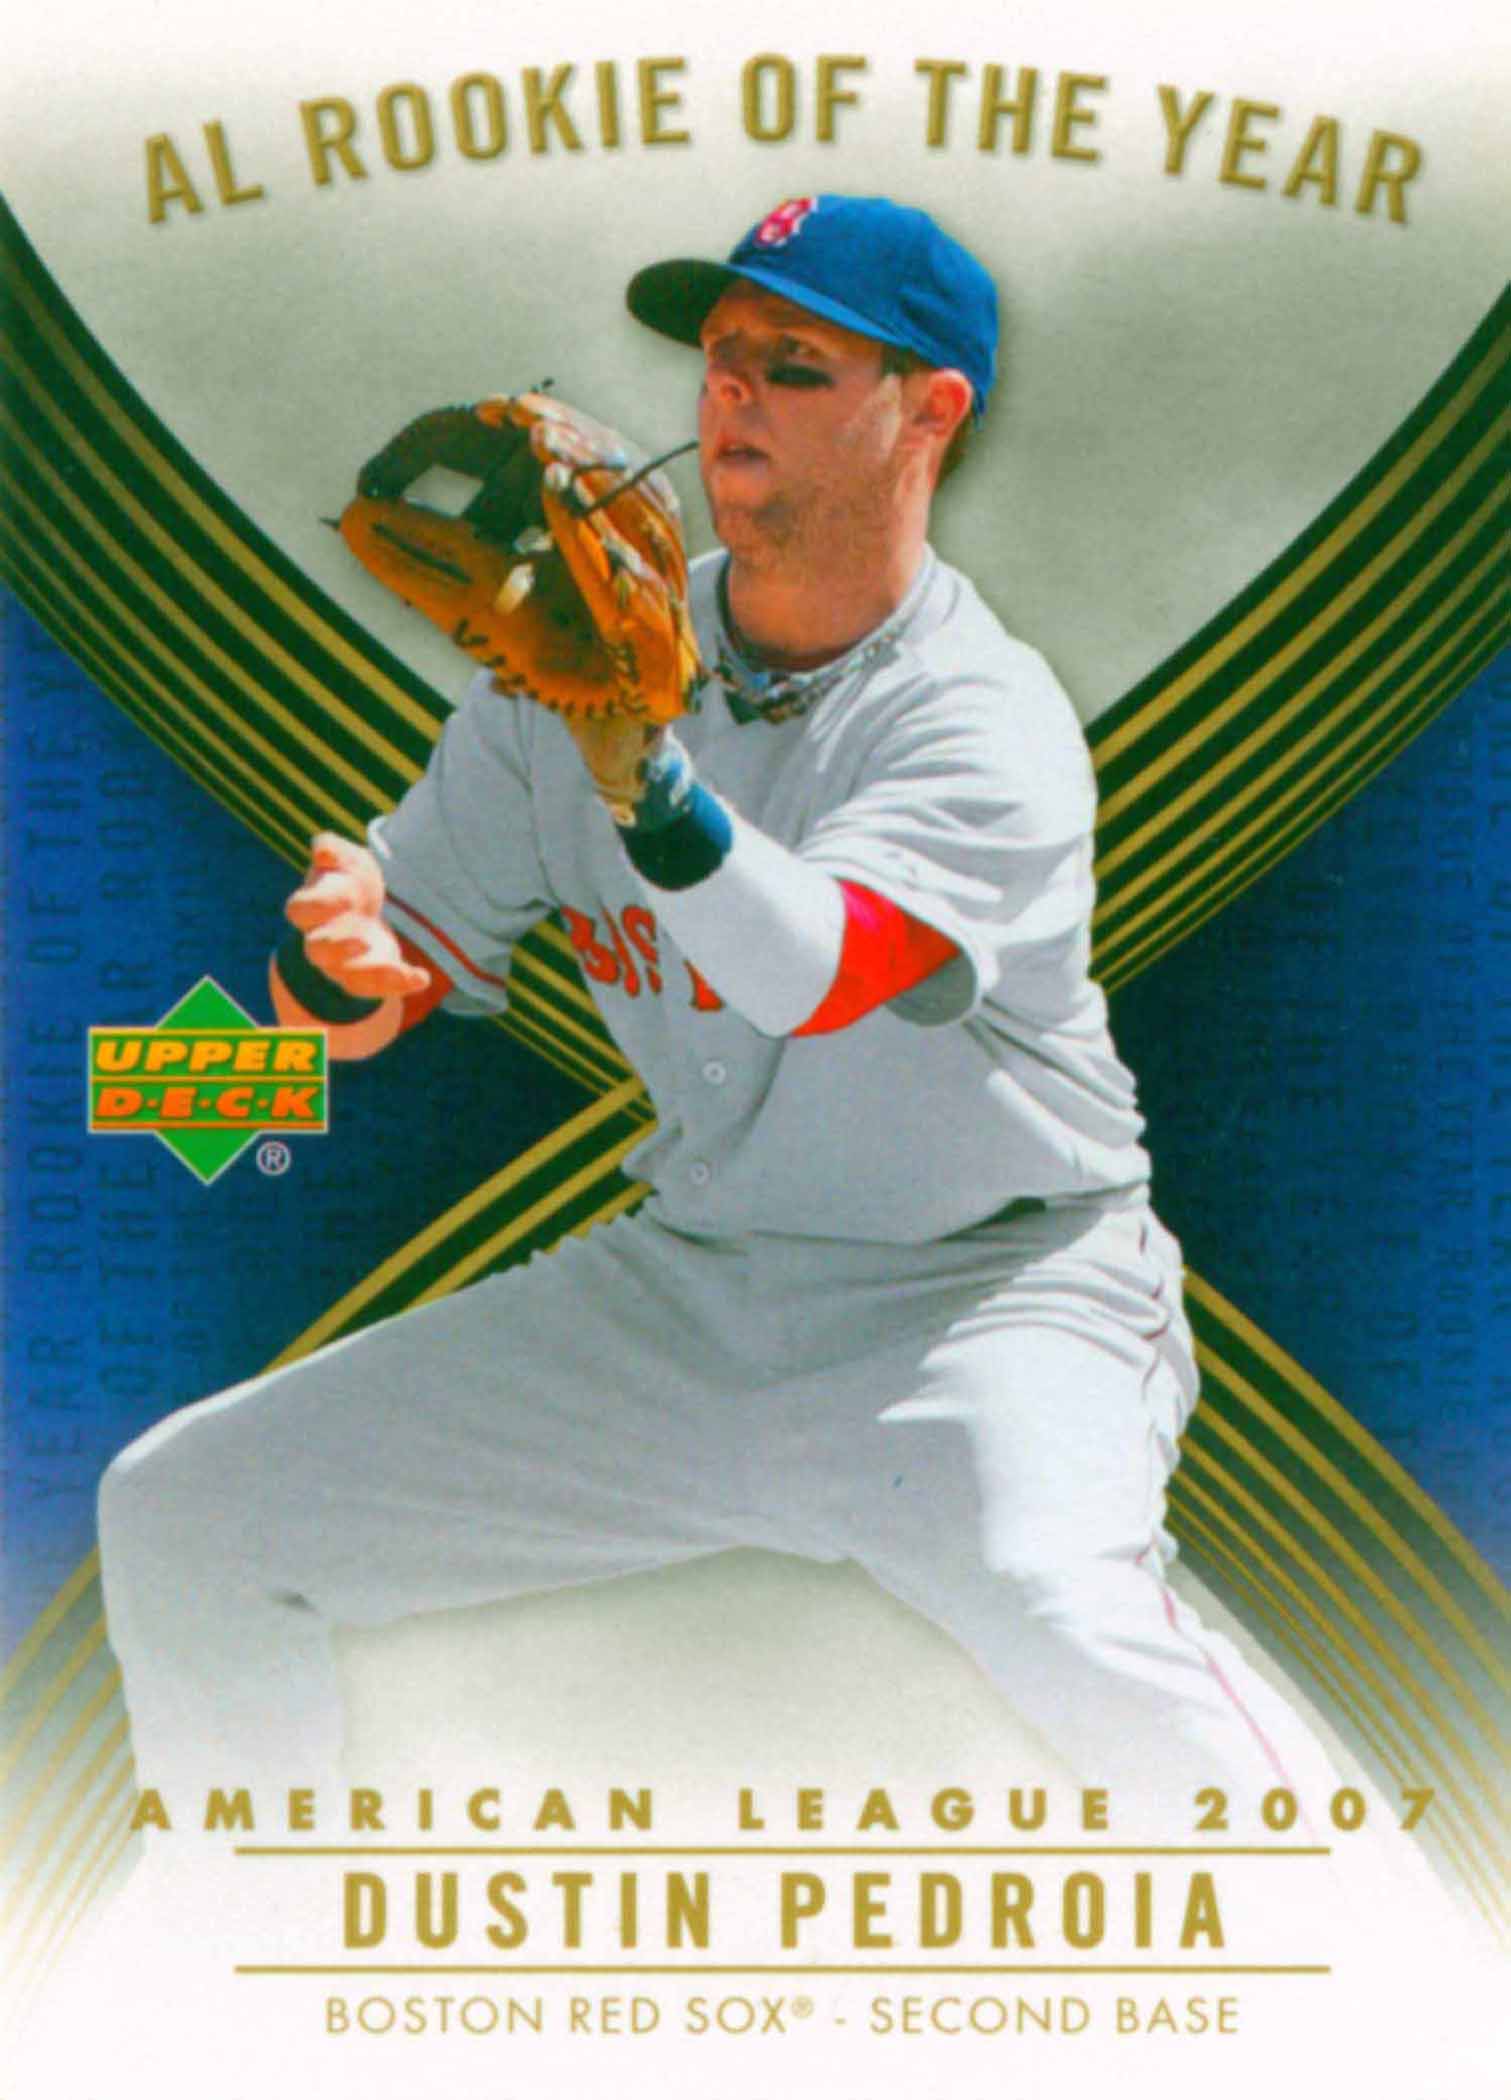 2007 Upper Deck MLB Rookie Card of the Month